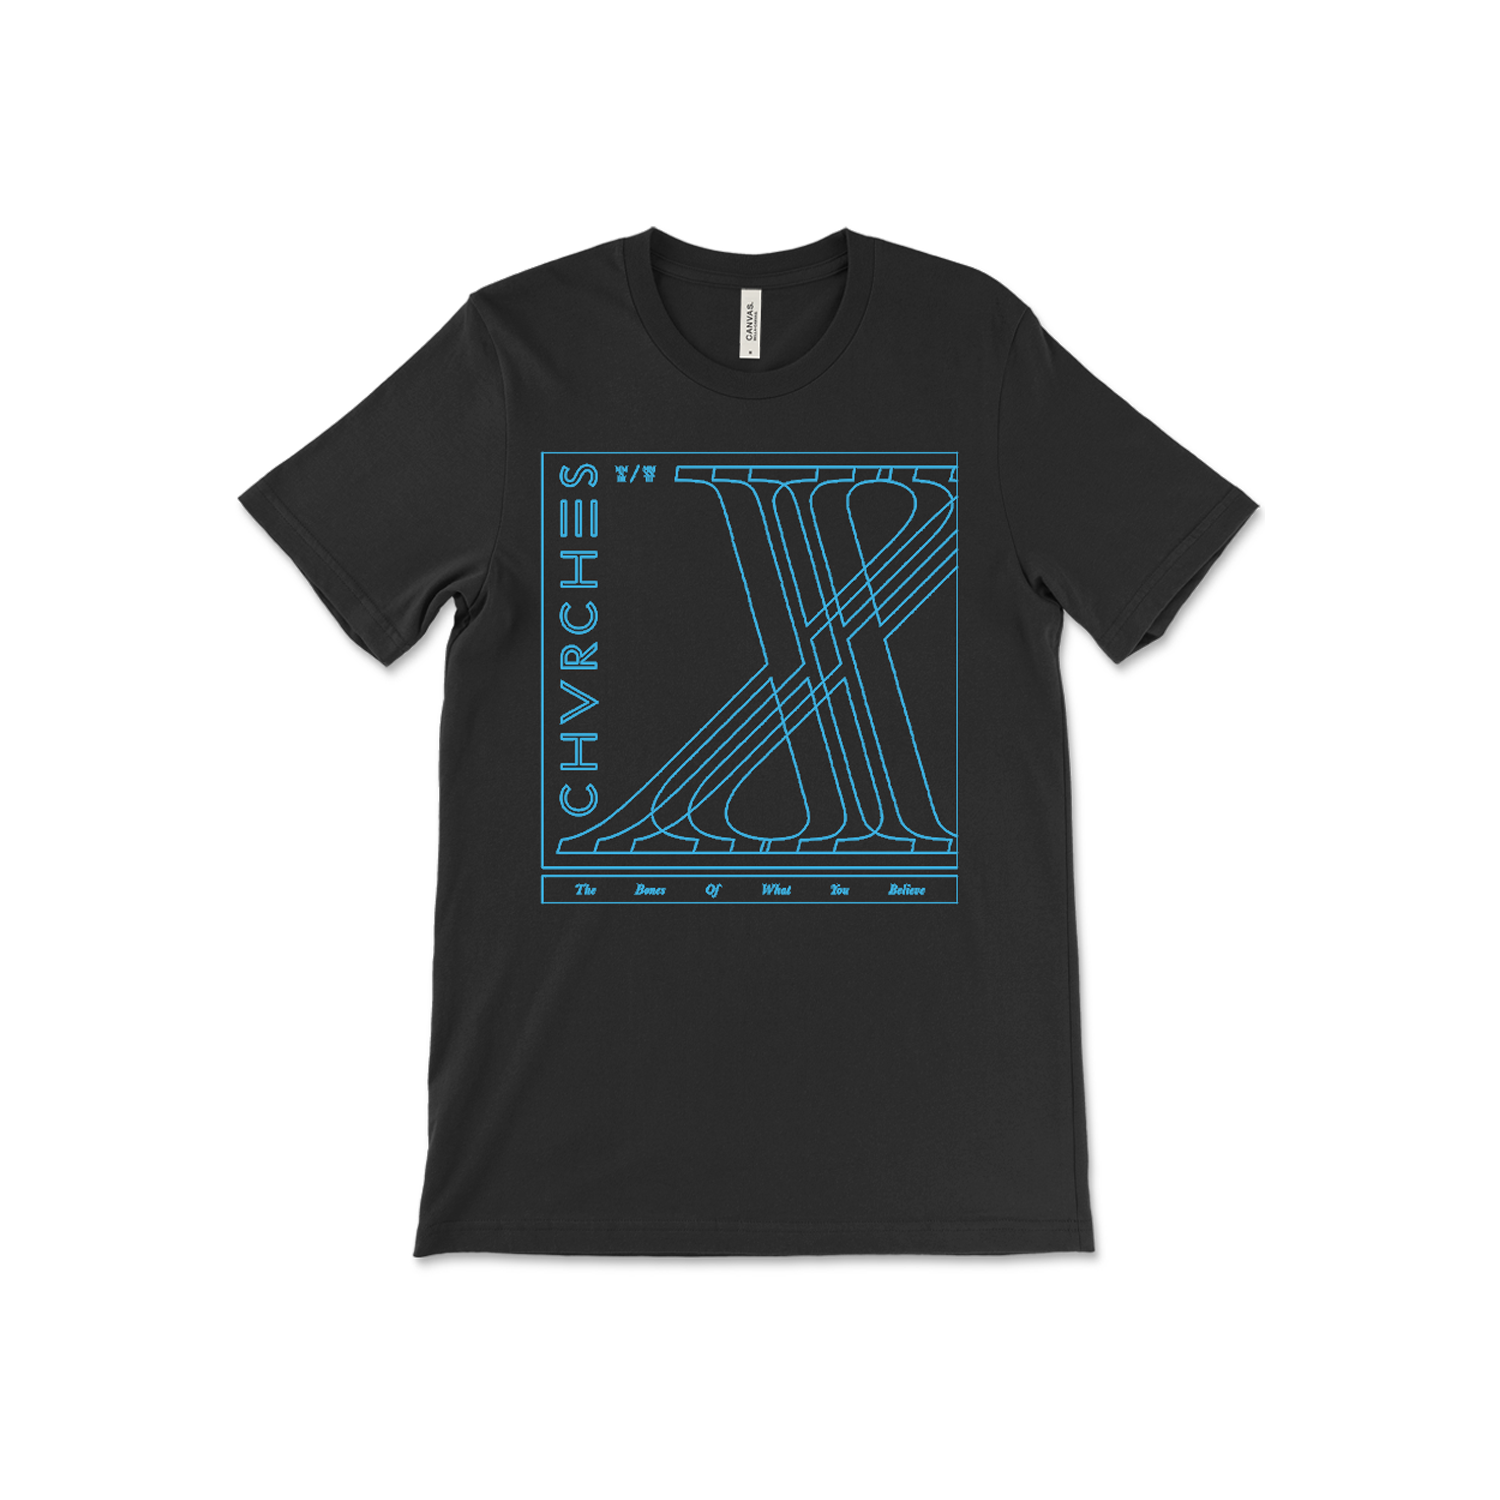 Chvrches - The Bones Of What You Believe (10th Anniversary Edition)  Exclusive T-shirt